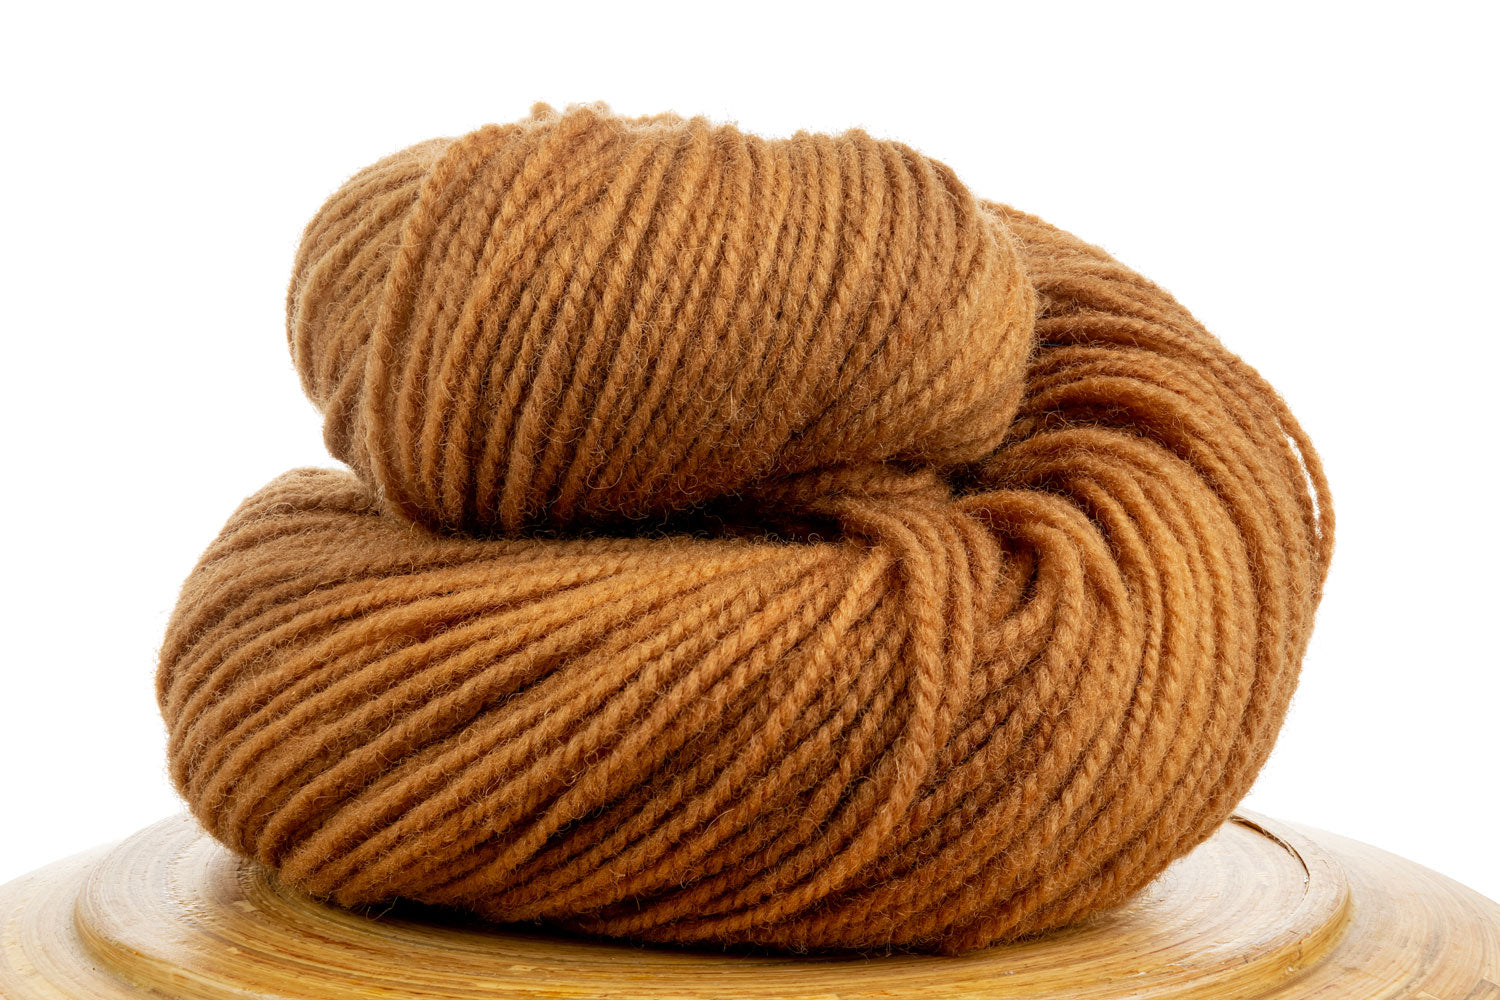 Winfield Canadian hand-dyed wool yarn in Sandy Beach, a pale brown